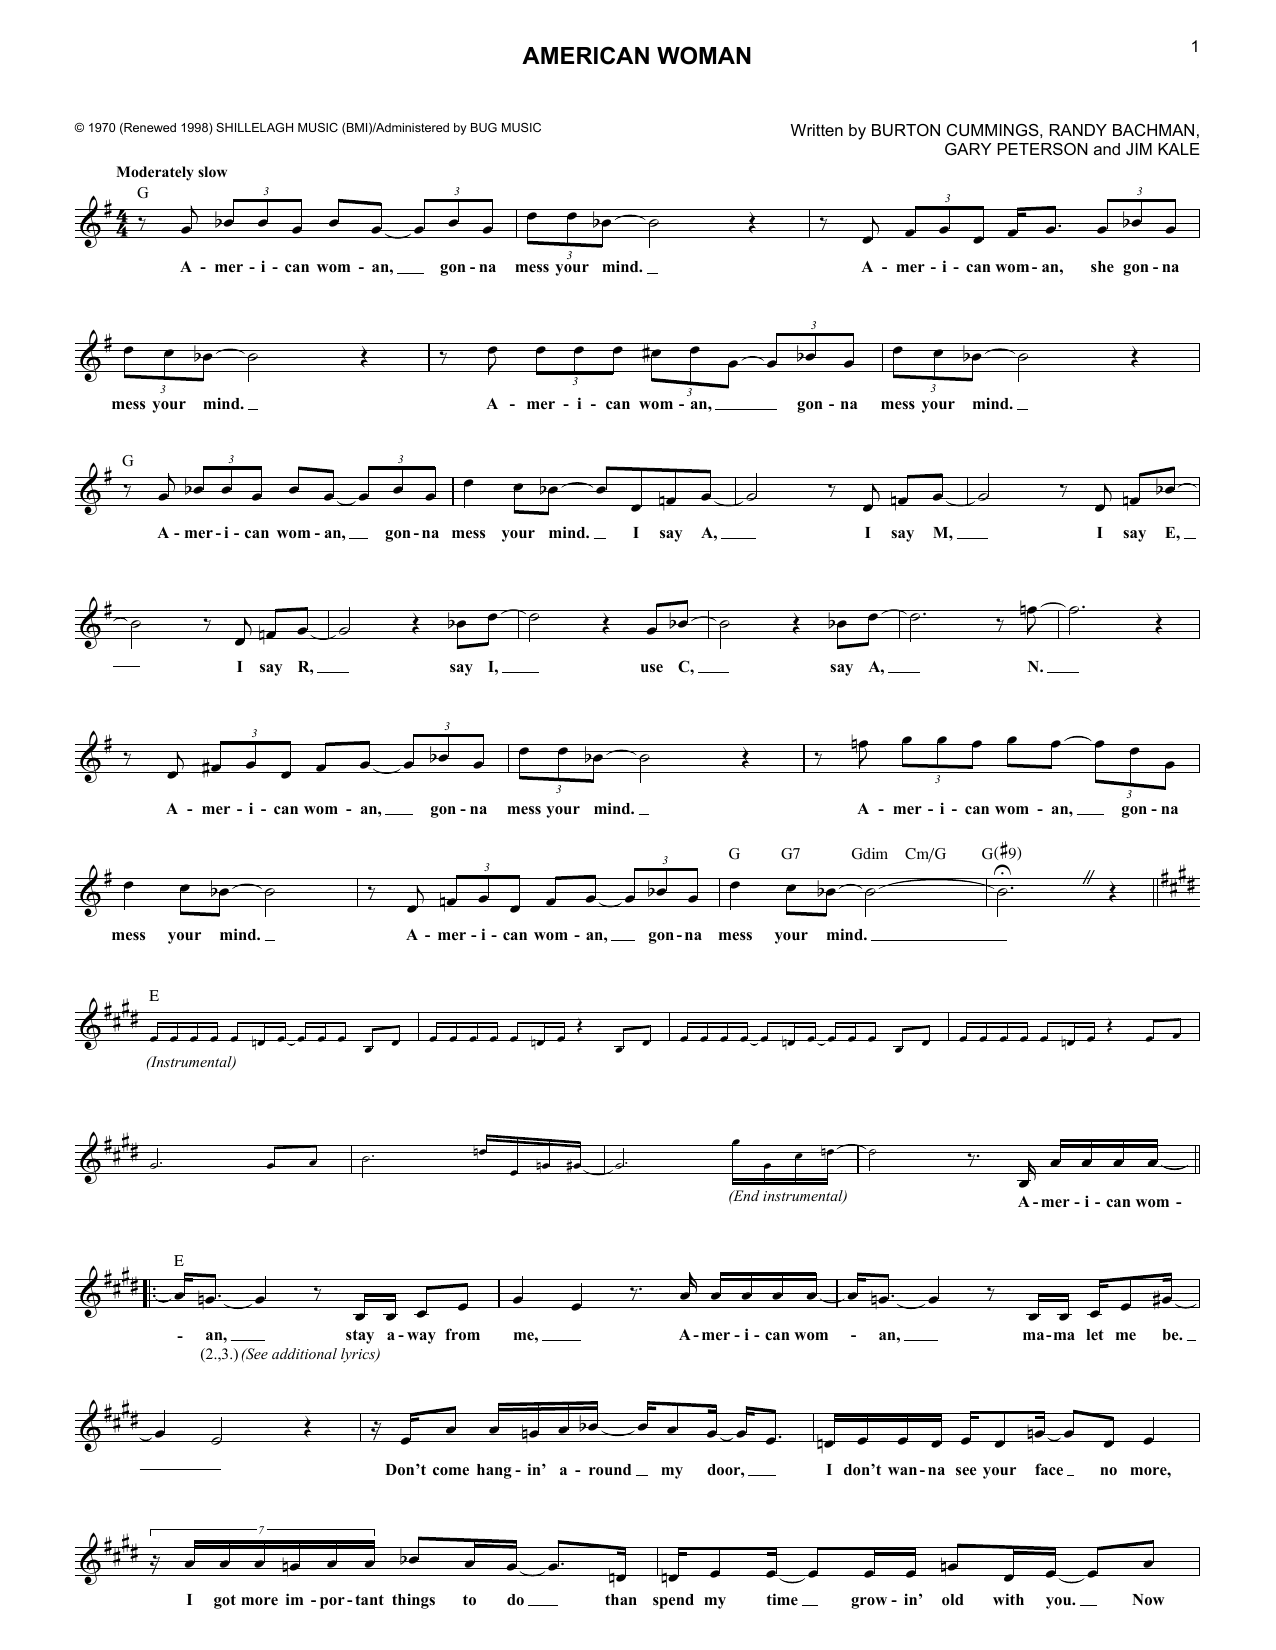 Download The Guess Who American Woman Sheet Music